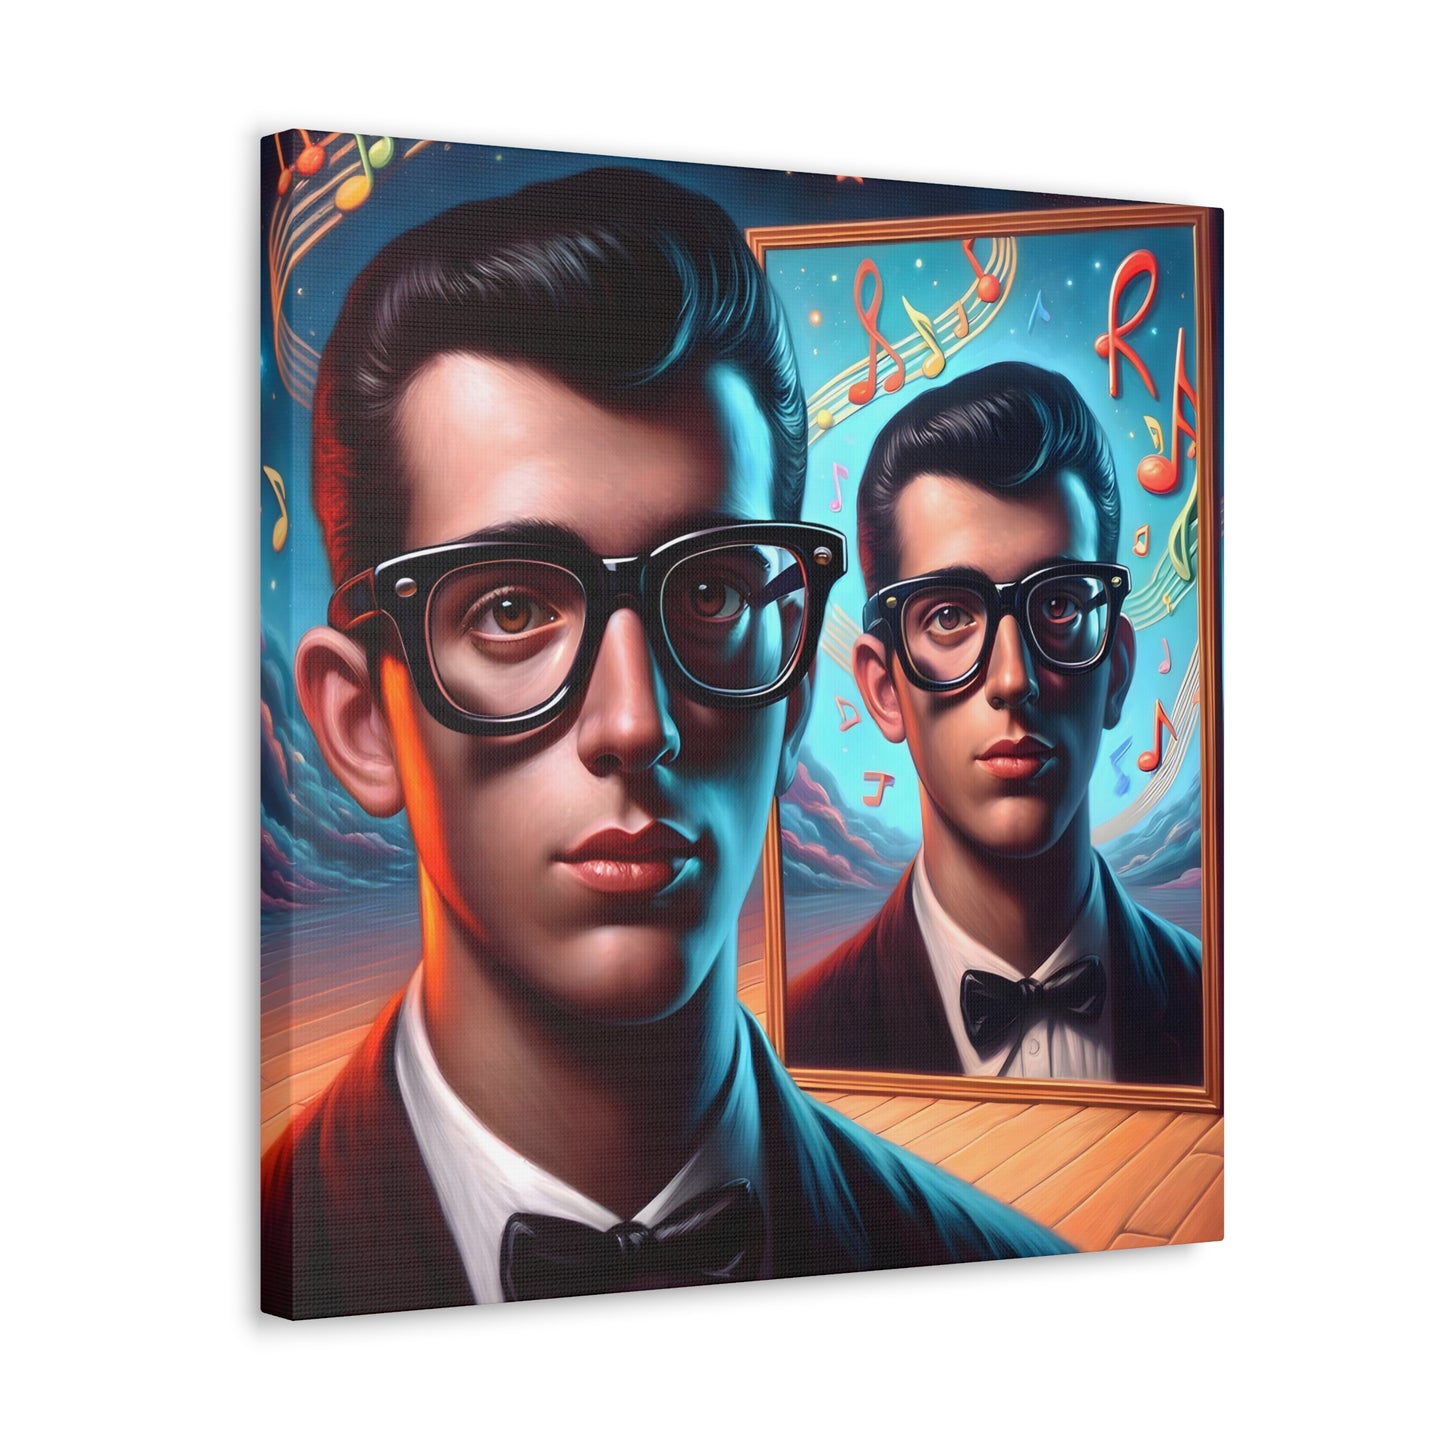 image 4 Vibrant retro-inspired artwork capturing the essence of the 1950s rock and roll era. Features a cool vintage figure with slick hair and thick-rimmed glasses, gazing into a mirror that reflects a dreamy, music-filled cosmos with musical notes and celestial bodies. Warm color palette with twilight blues, depicting an intimate yet imaginative scene reminiscent of vinyl and jukeboxes.